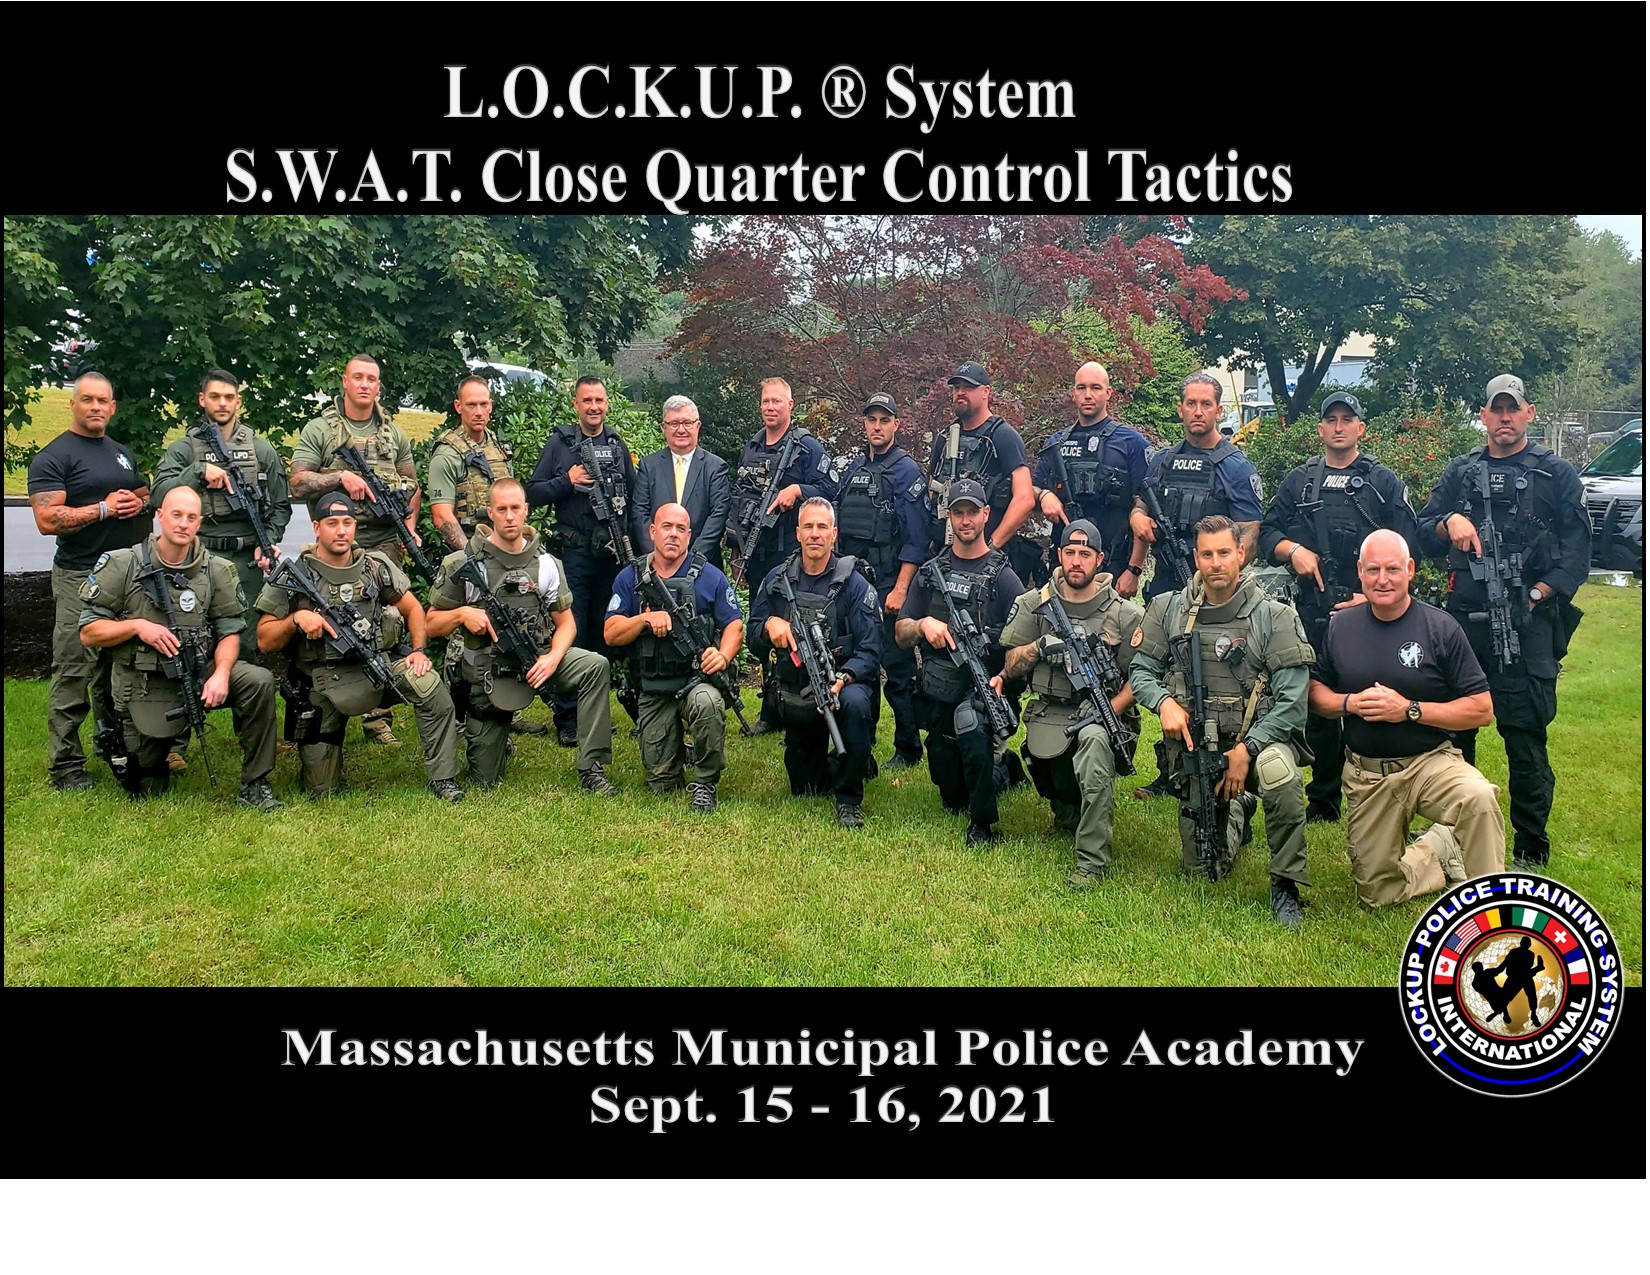 MA – LOCKUP Close Quarter Control For SWAT Officers